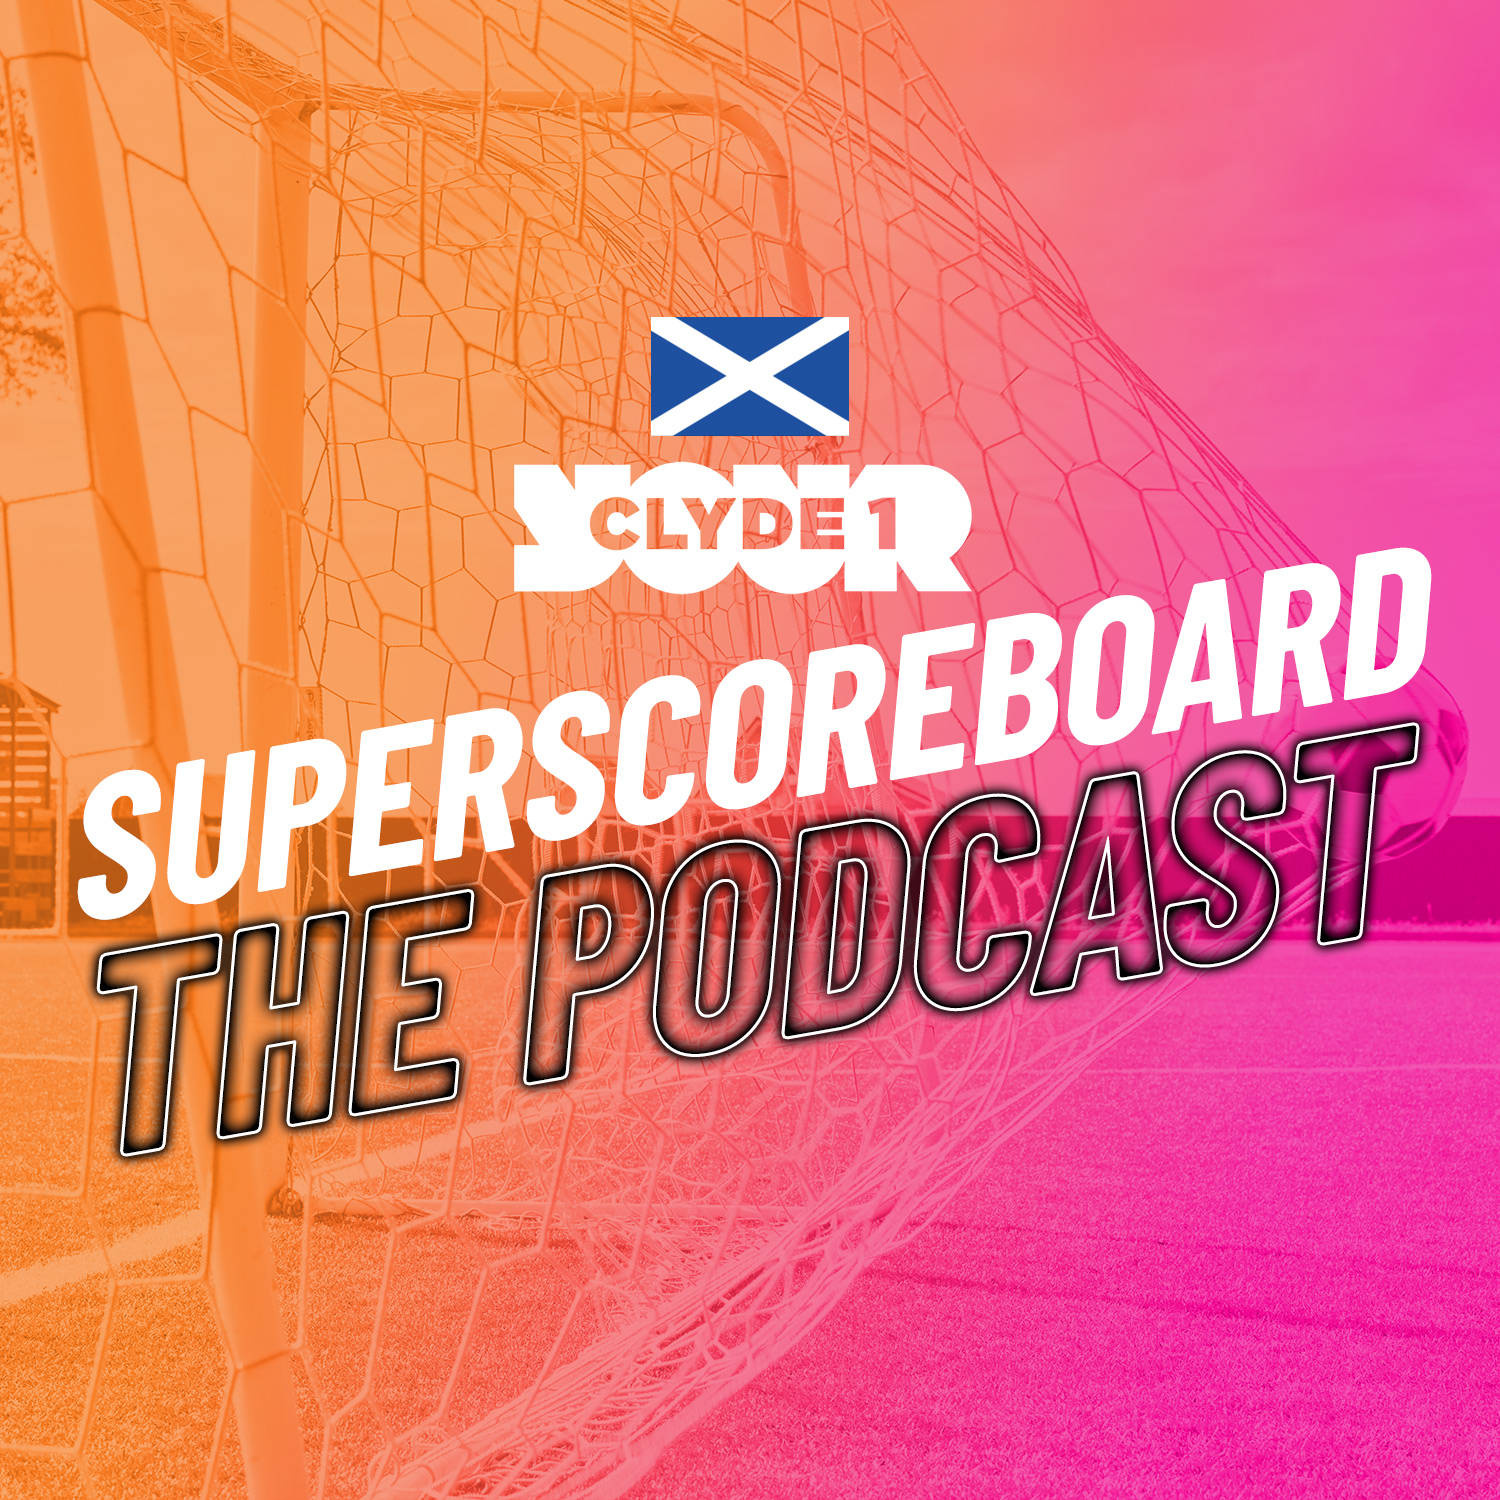 Tuesday 27th February Clyde 1 Superscoreboard